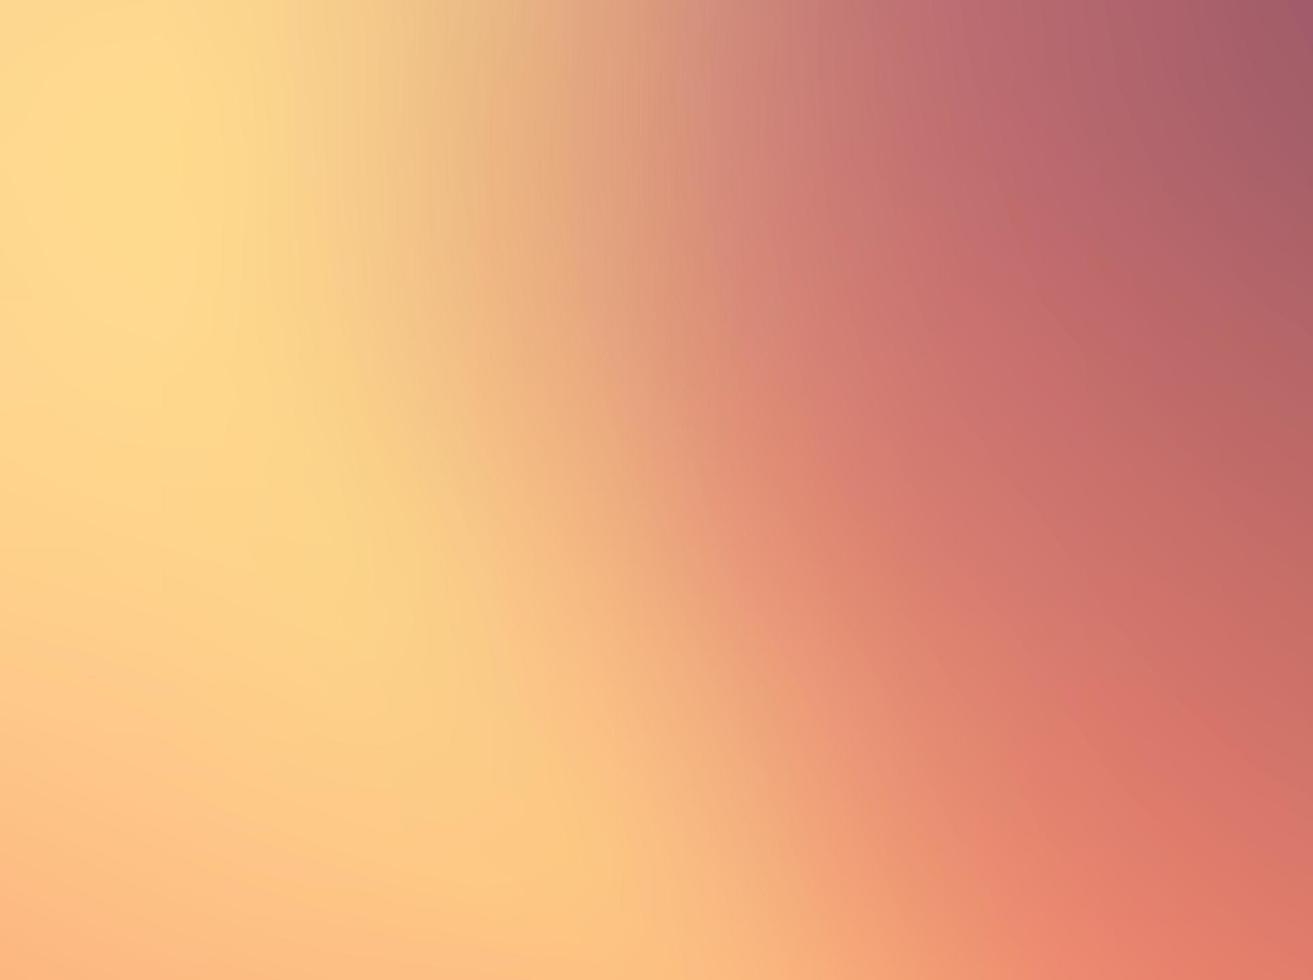 Vector abstract smooth blur background. Backdrop for your design, wallpaper. Template with color transition, gradient